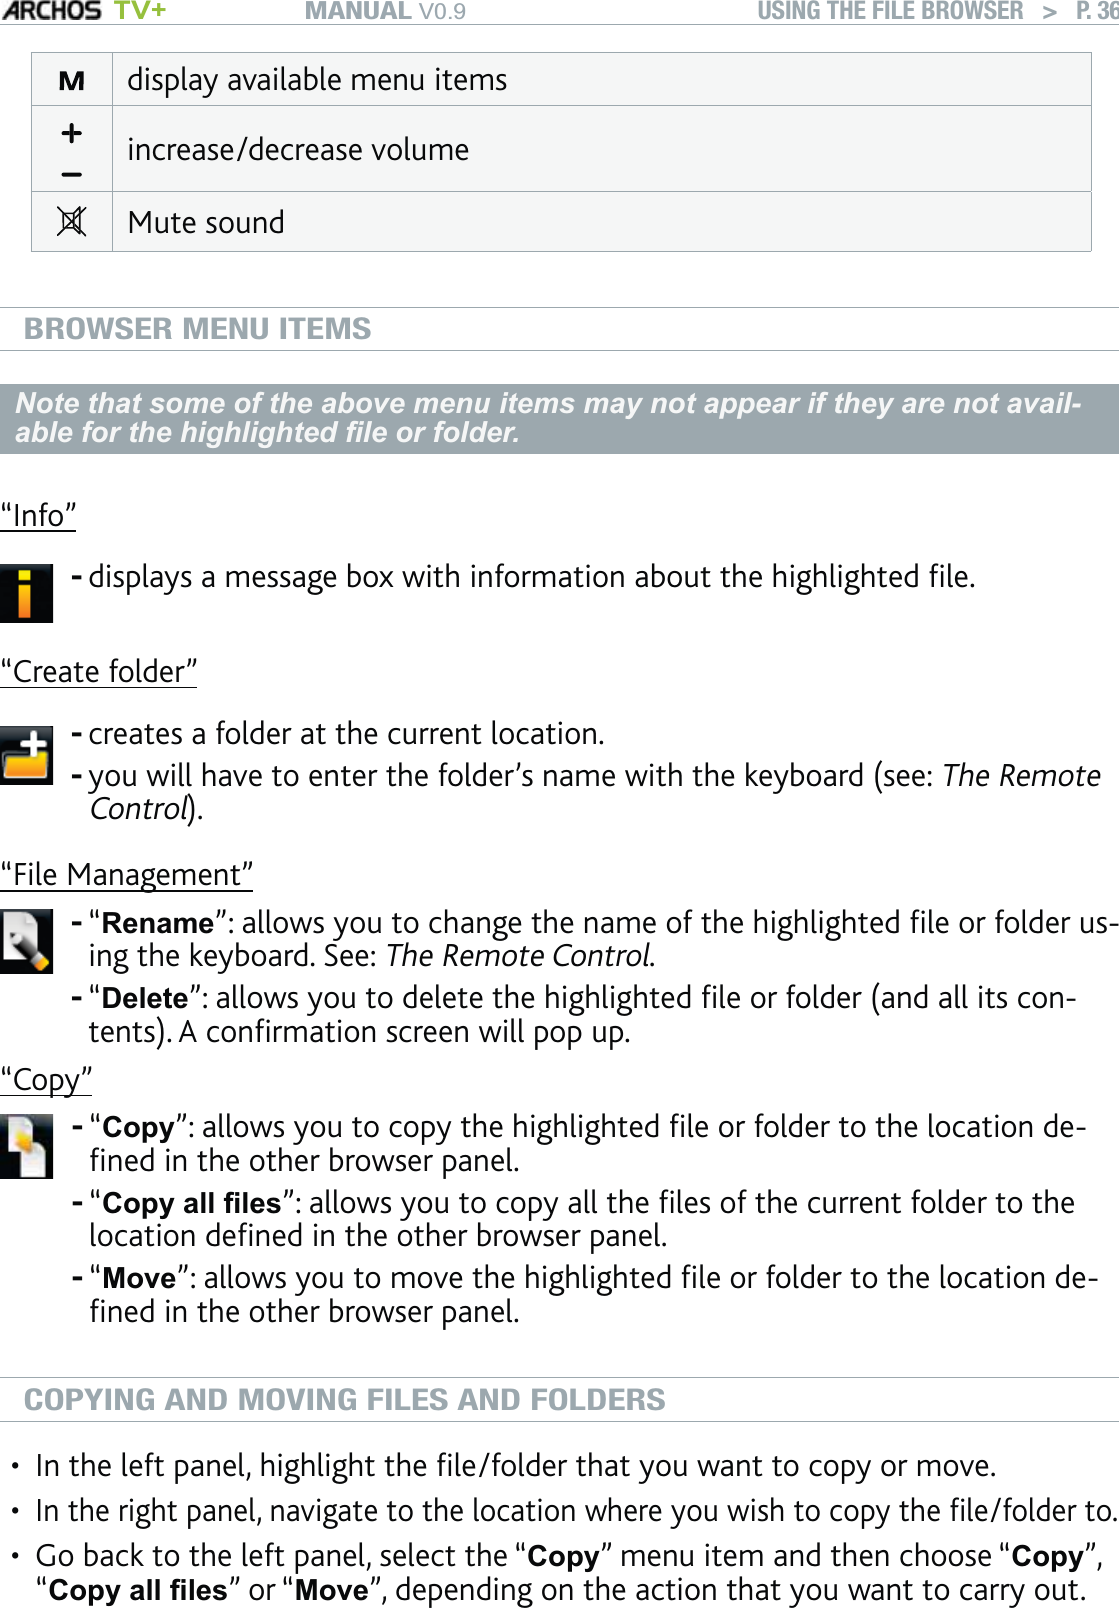 MANUAL V0.9 TV+ USING THE FILE BROWSER   &gt;   P. 36display available menu itemsincrease/decrease volumeMute soundBROWSER MENU ITEMSNote that some of the above menu items may not appear if they are not avail-able for the highlighted ﬁle or folder.“Info”displays a message box with information about the highlighted ﬁle.-“Create folder”creates a folder at the current location.you will have to enter the folder’s name with the keyboard (see: The Remote Control).--“File Management”“Rename”: allows you to change the name of the highlighted ﬁle or folder us-ing the keyboard. See: The Remote Control.“Delete”: allows you to delete the highlighted ﬁle or folder (and all its con-tents). A conﬁrmation screen will pop up.--“Copy”“Copy”: allows you to copy the highlighted ﬁle or folder to the location de-ﬁned in the other browser panel.“Copy all ﬁles”: allows you to copy all the ﬁles of the current folder to the location deﬁned in the other browser panel.“Move”: allows you to move the highlighted ﬁle or folder to the location de-ﬁned in the other browser panel.---COPYING AND MOVING FILES AND FOLDERSIn the left panel, highlight the ﬁle/folder that you want to copy or move.In the right panel, navigate to the location where you wish to copy the ﬁle/folder to.Go back to the left panel, select the “Copy” menu item and then choose “Copy”, “Copy all ﬁles” or “Move”, depending on the action that you want to carry out.•••